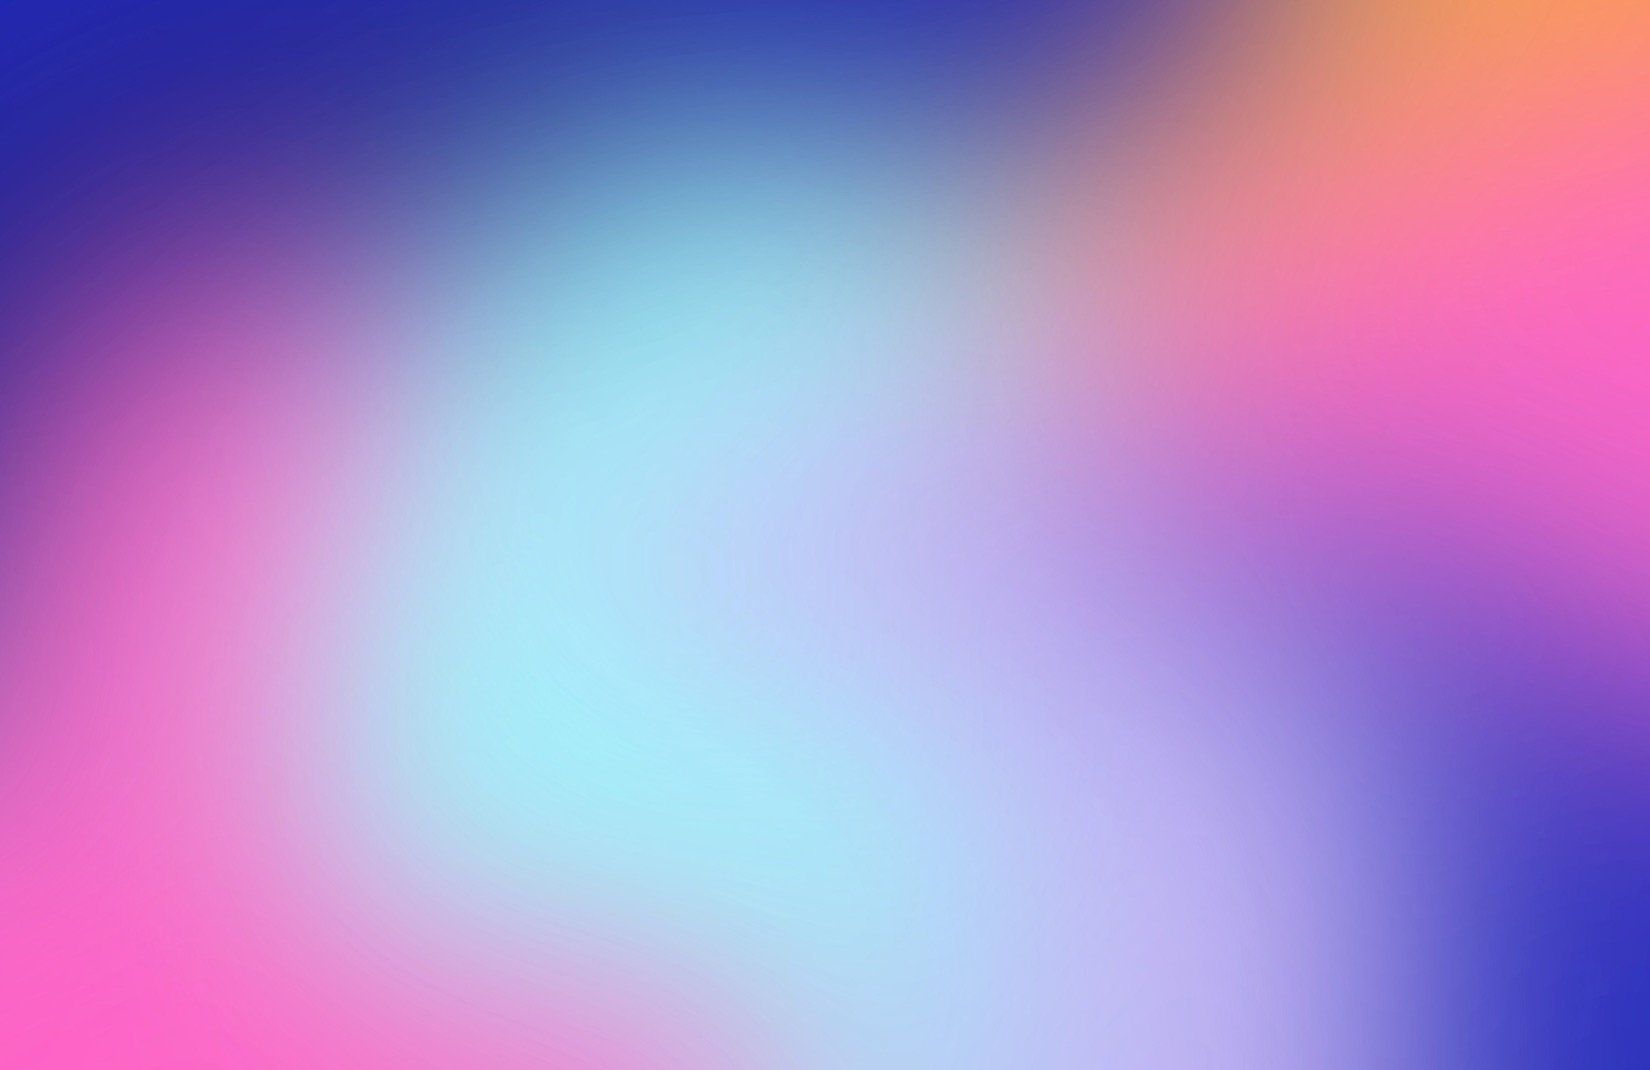 Pastel Blue And Purple Wallpapers